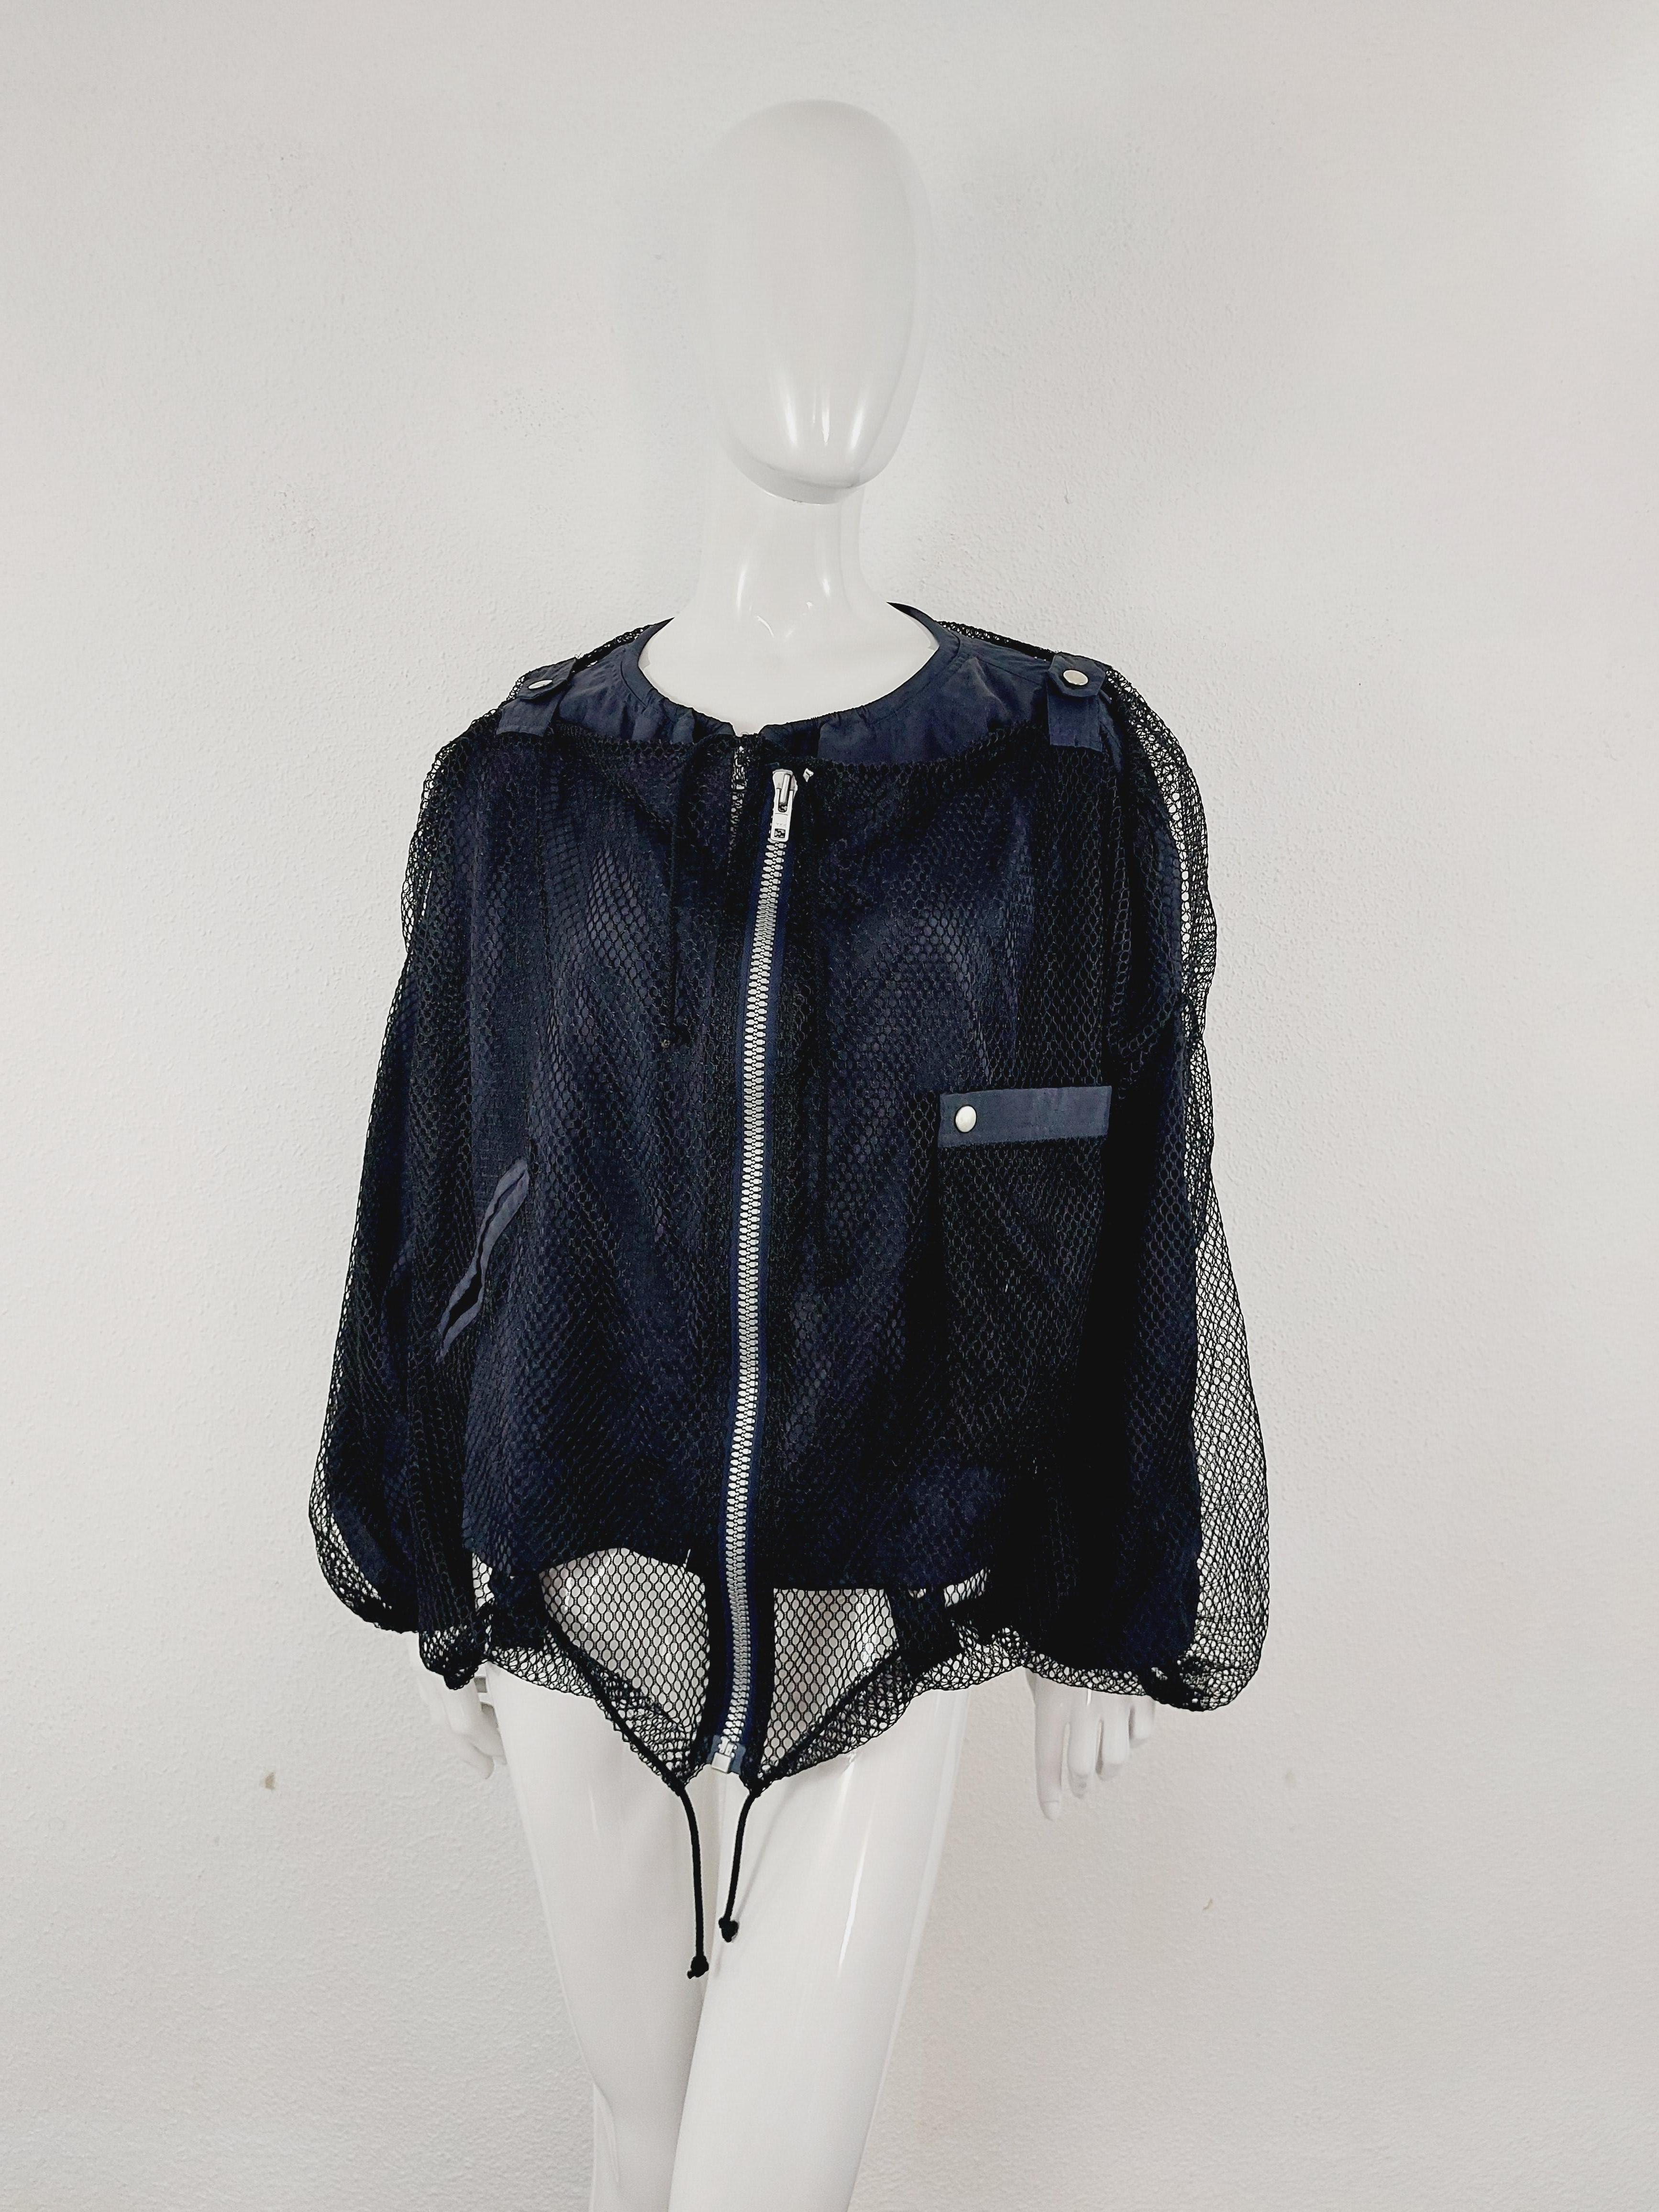 SS 1992 Runway Issey Miyake Double Layered Mesh Fishnet Net Tactical Nylon Cargo Bomber Jacket
Runway piece from the Issey Miyake Collection & Fashion Show 1992 Spring / Summer.
Museum piece in excellent condition, without any signs of wear.
Season: